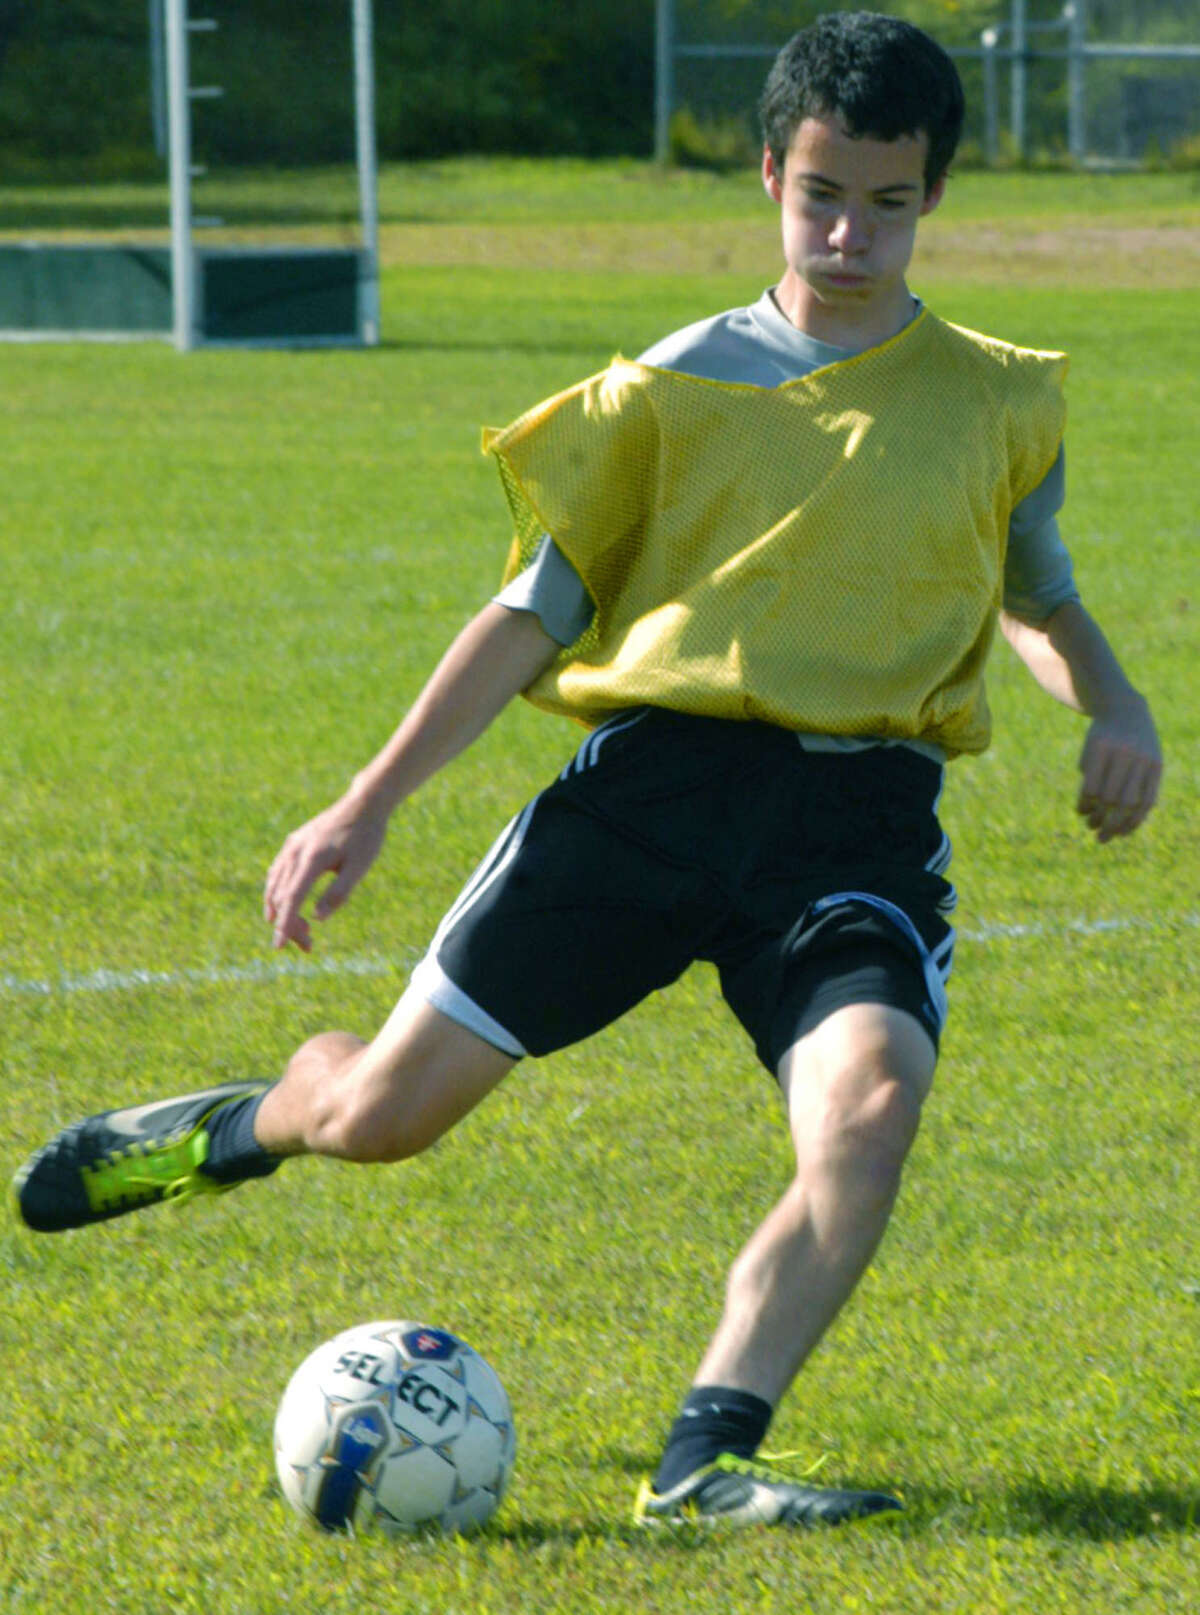 Jarod Riedl of the Green Wave leans into a crossing pass during pre-season practice for New Milford High School boys' soccer. September 2013